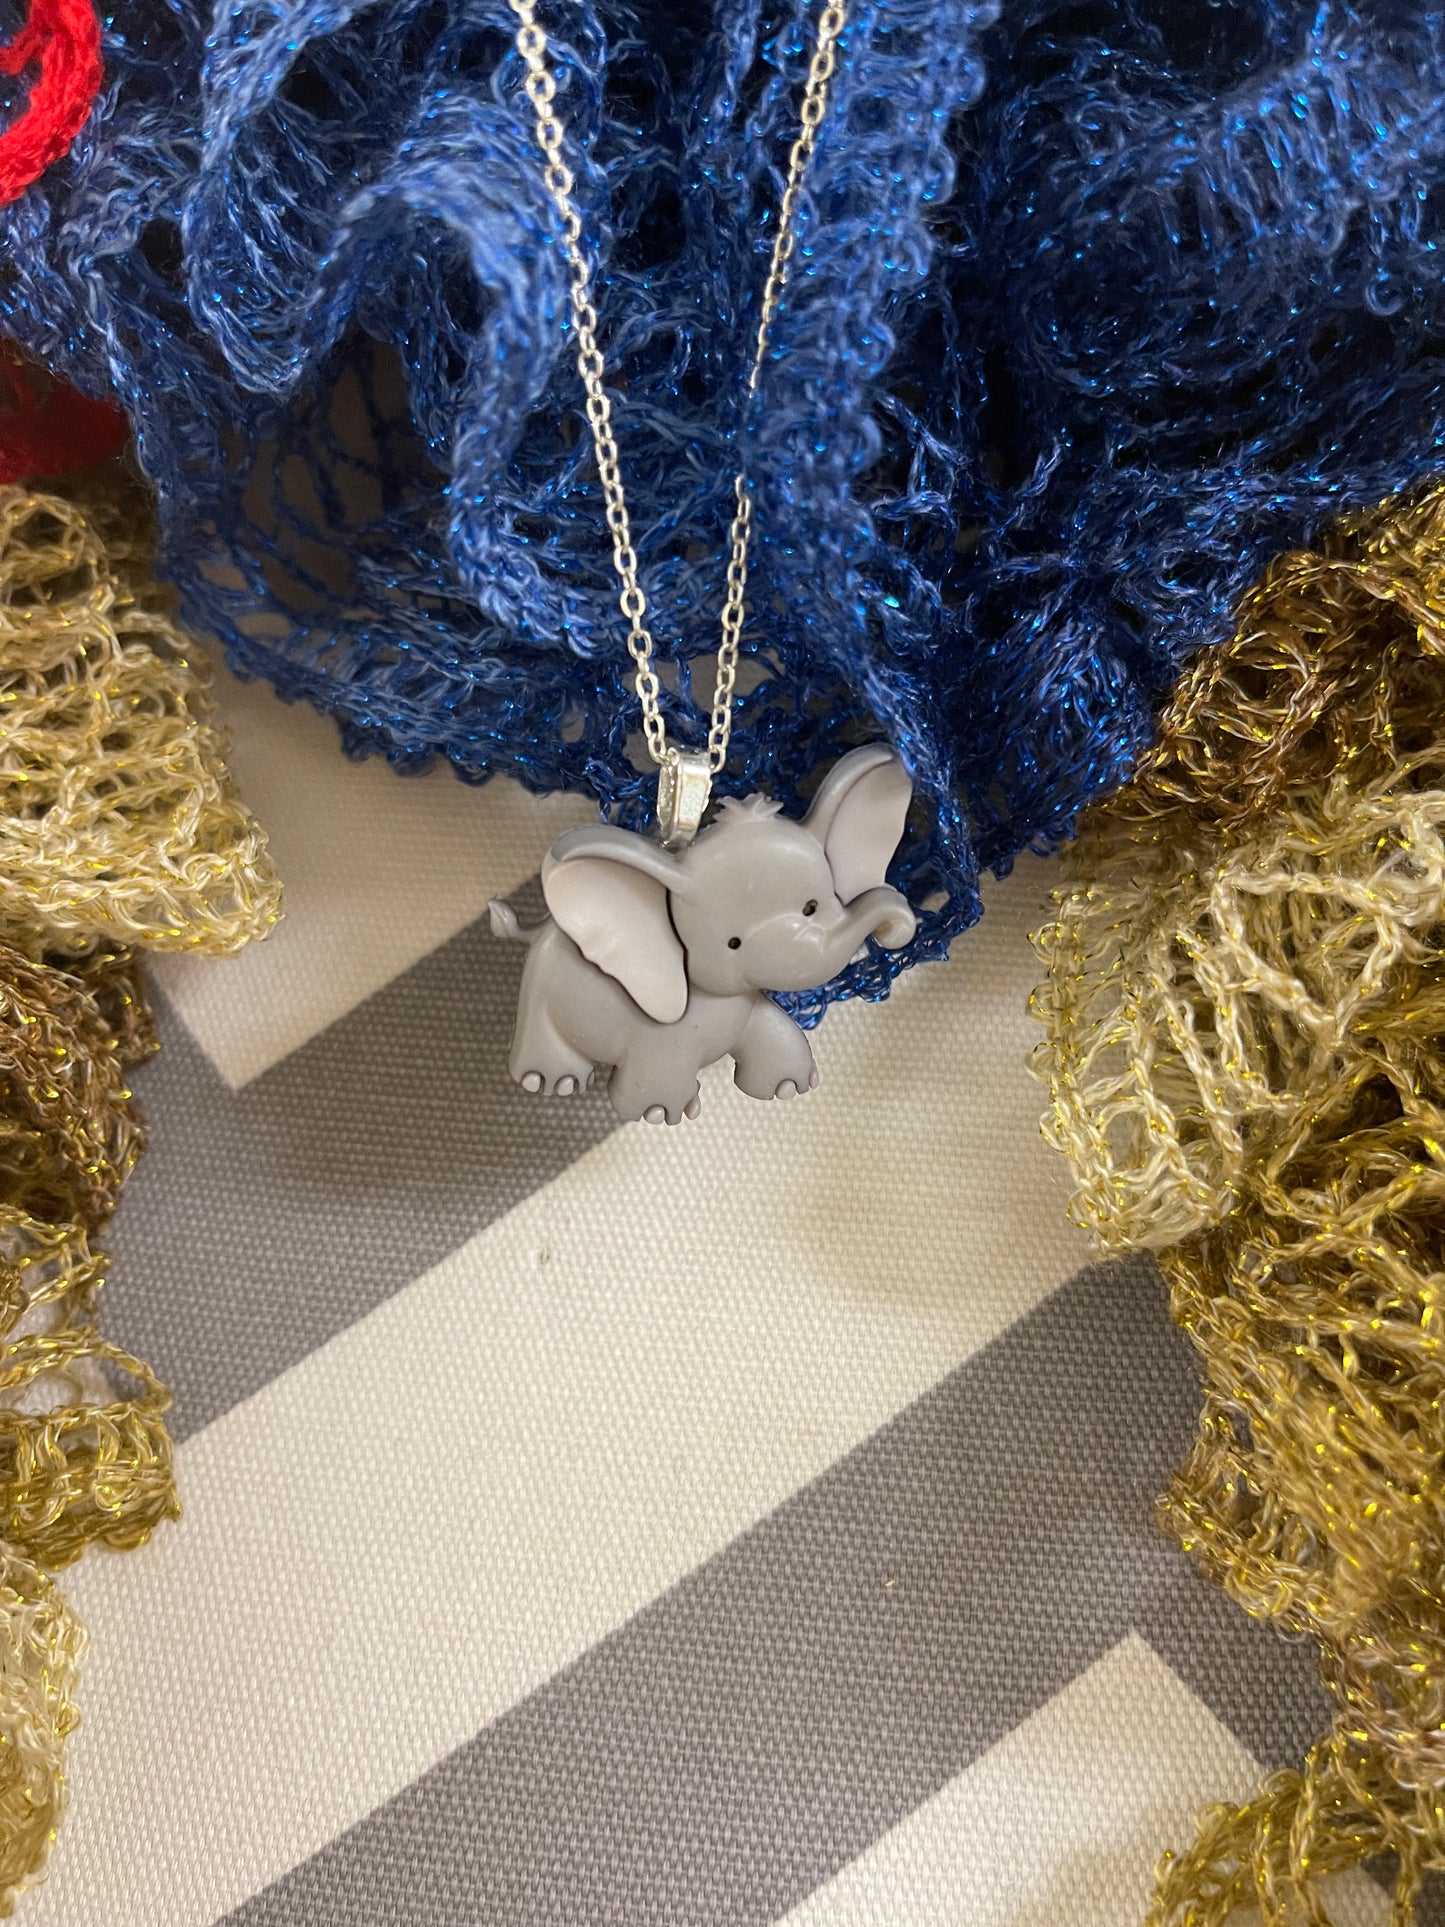 Tiny Trunk Elephant  Pendant on a Silver Chain NeclakcePink tiful of LOVE